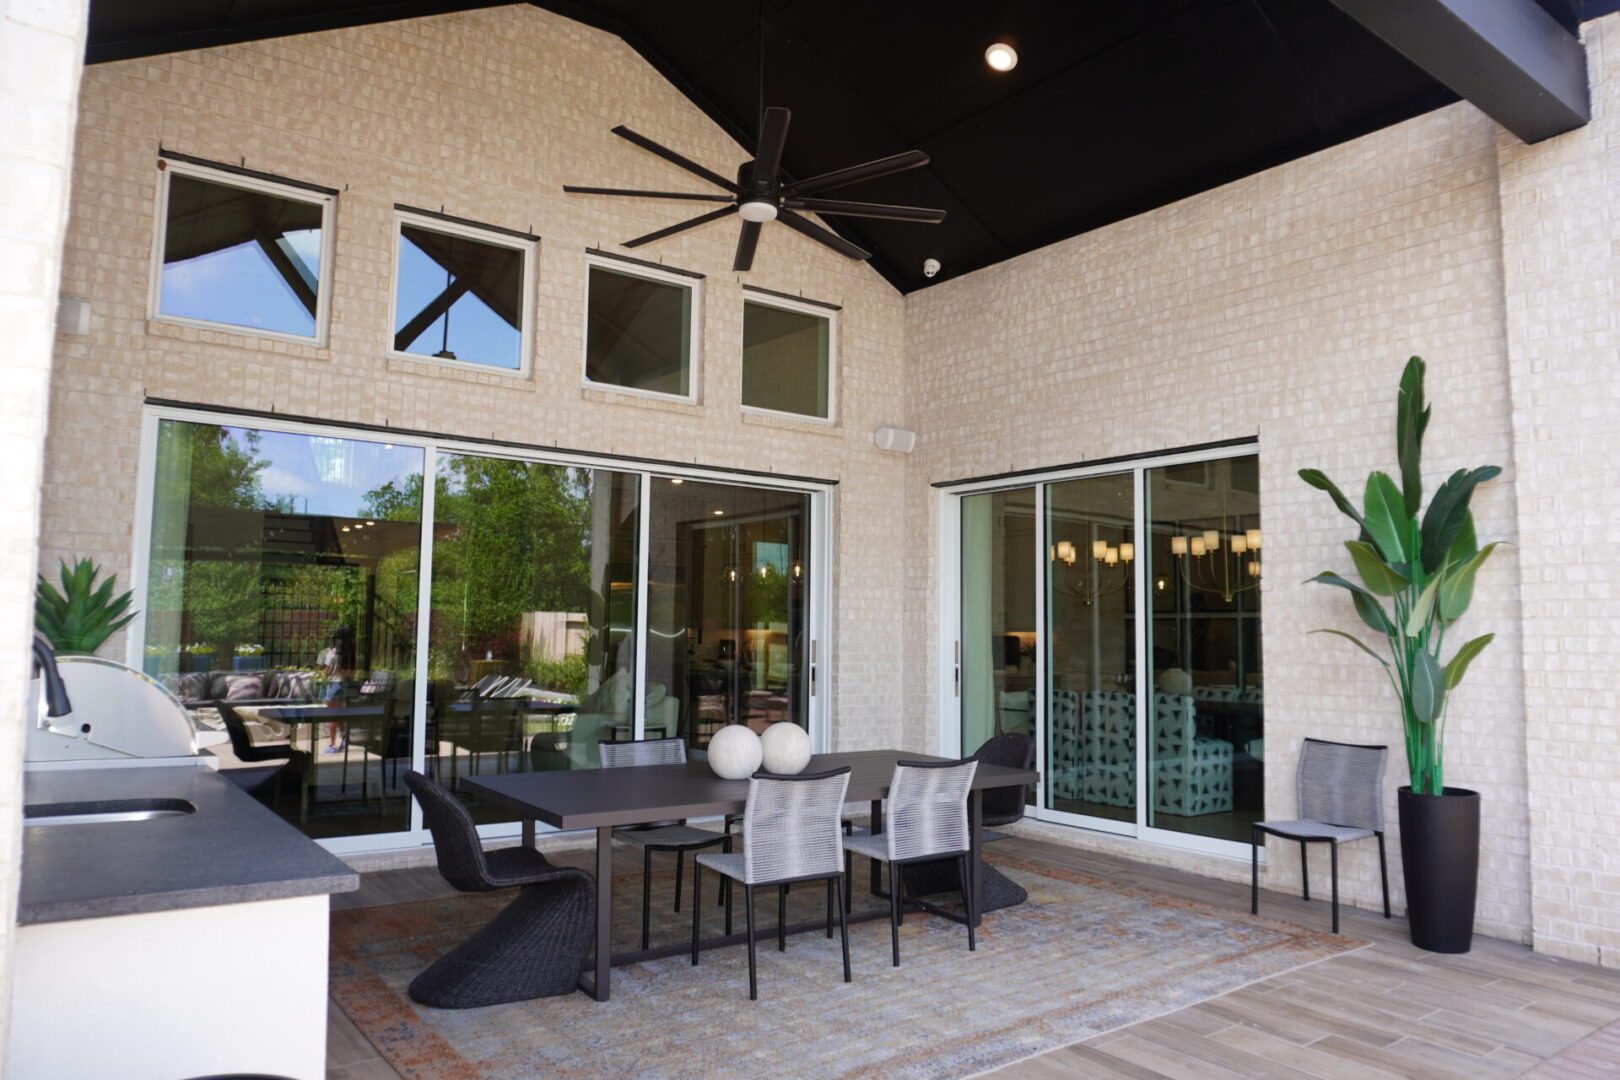 A patio with a table and chairs, and sliding glass doors.